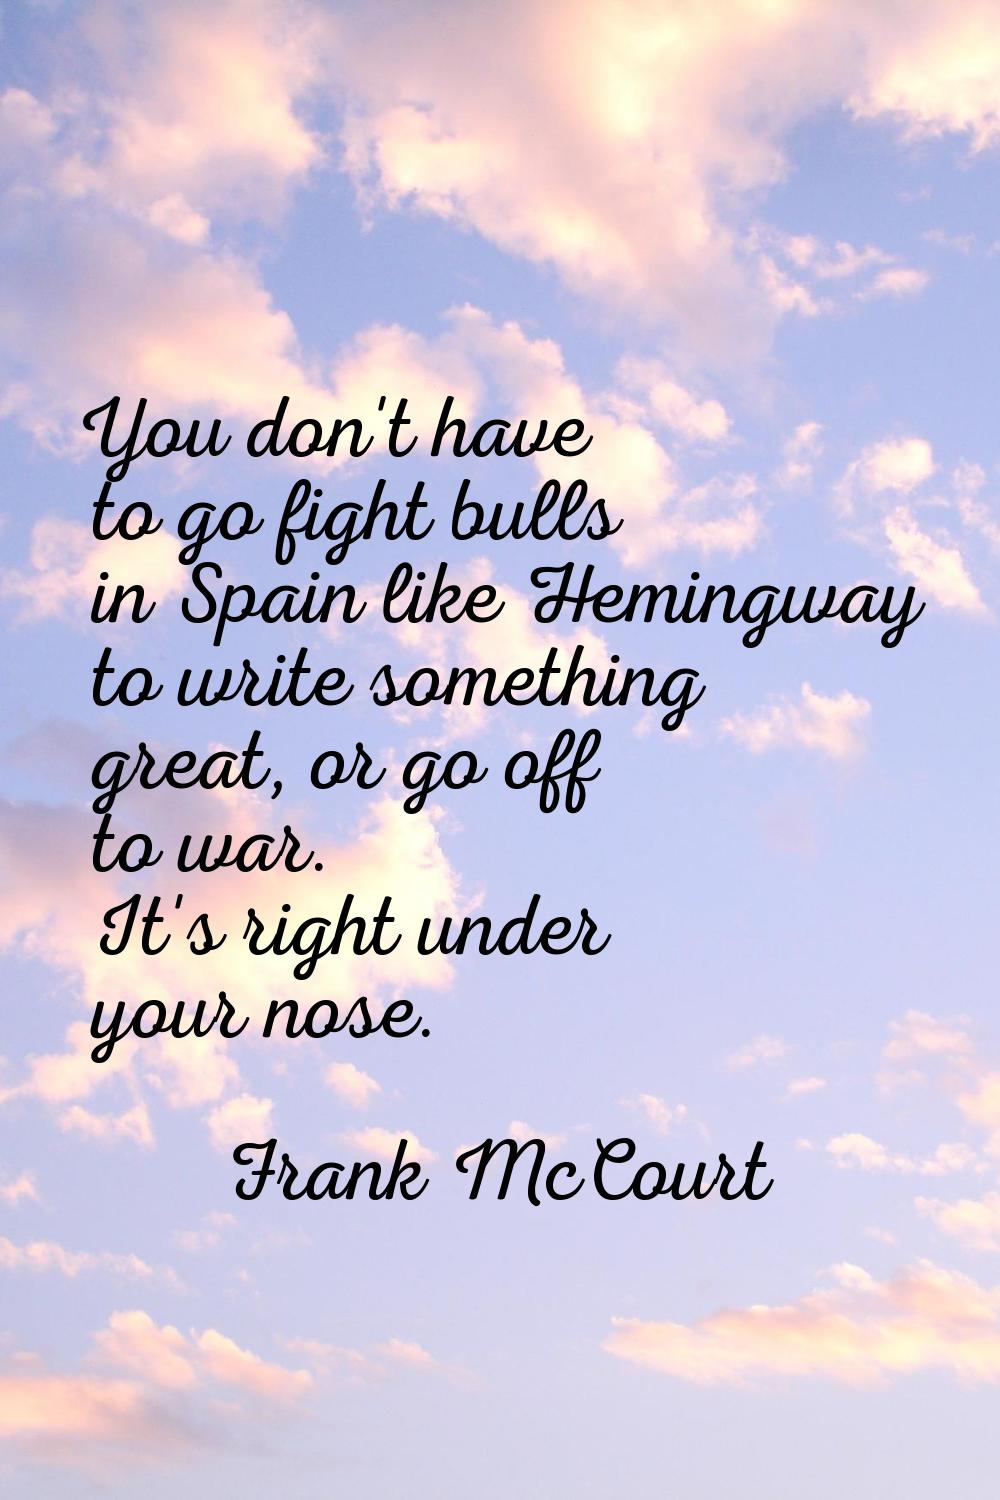 You don't have to go fight bulls in Spain like Hemingway to write something great, or go off to war